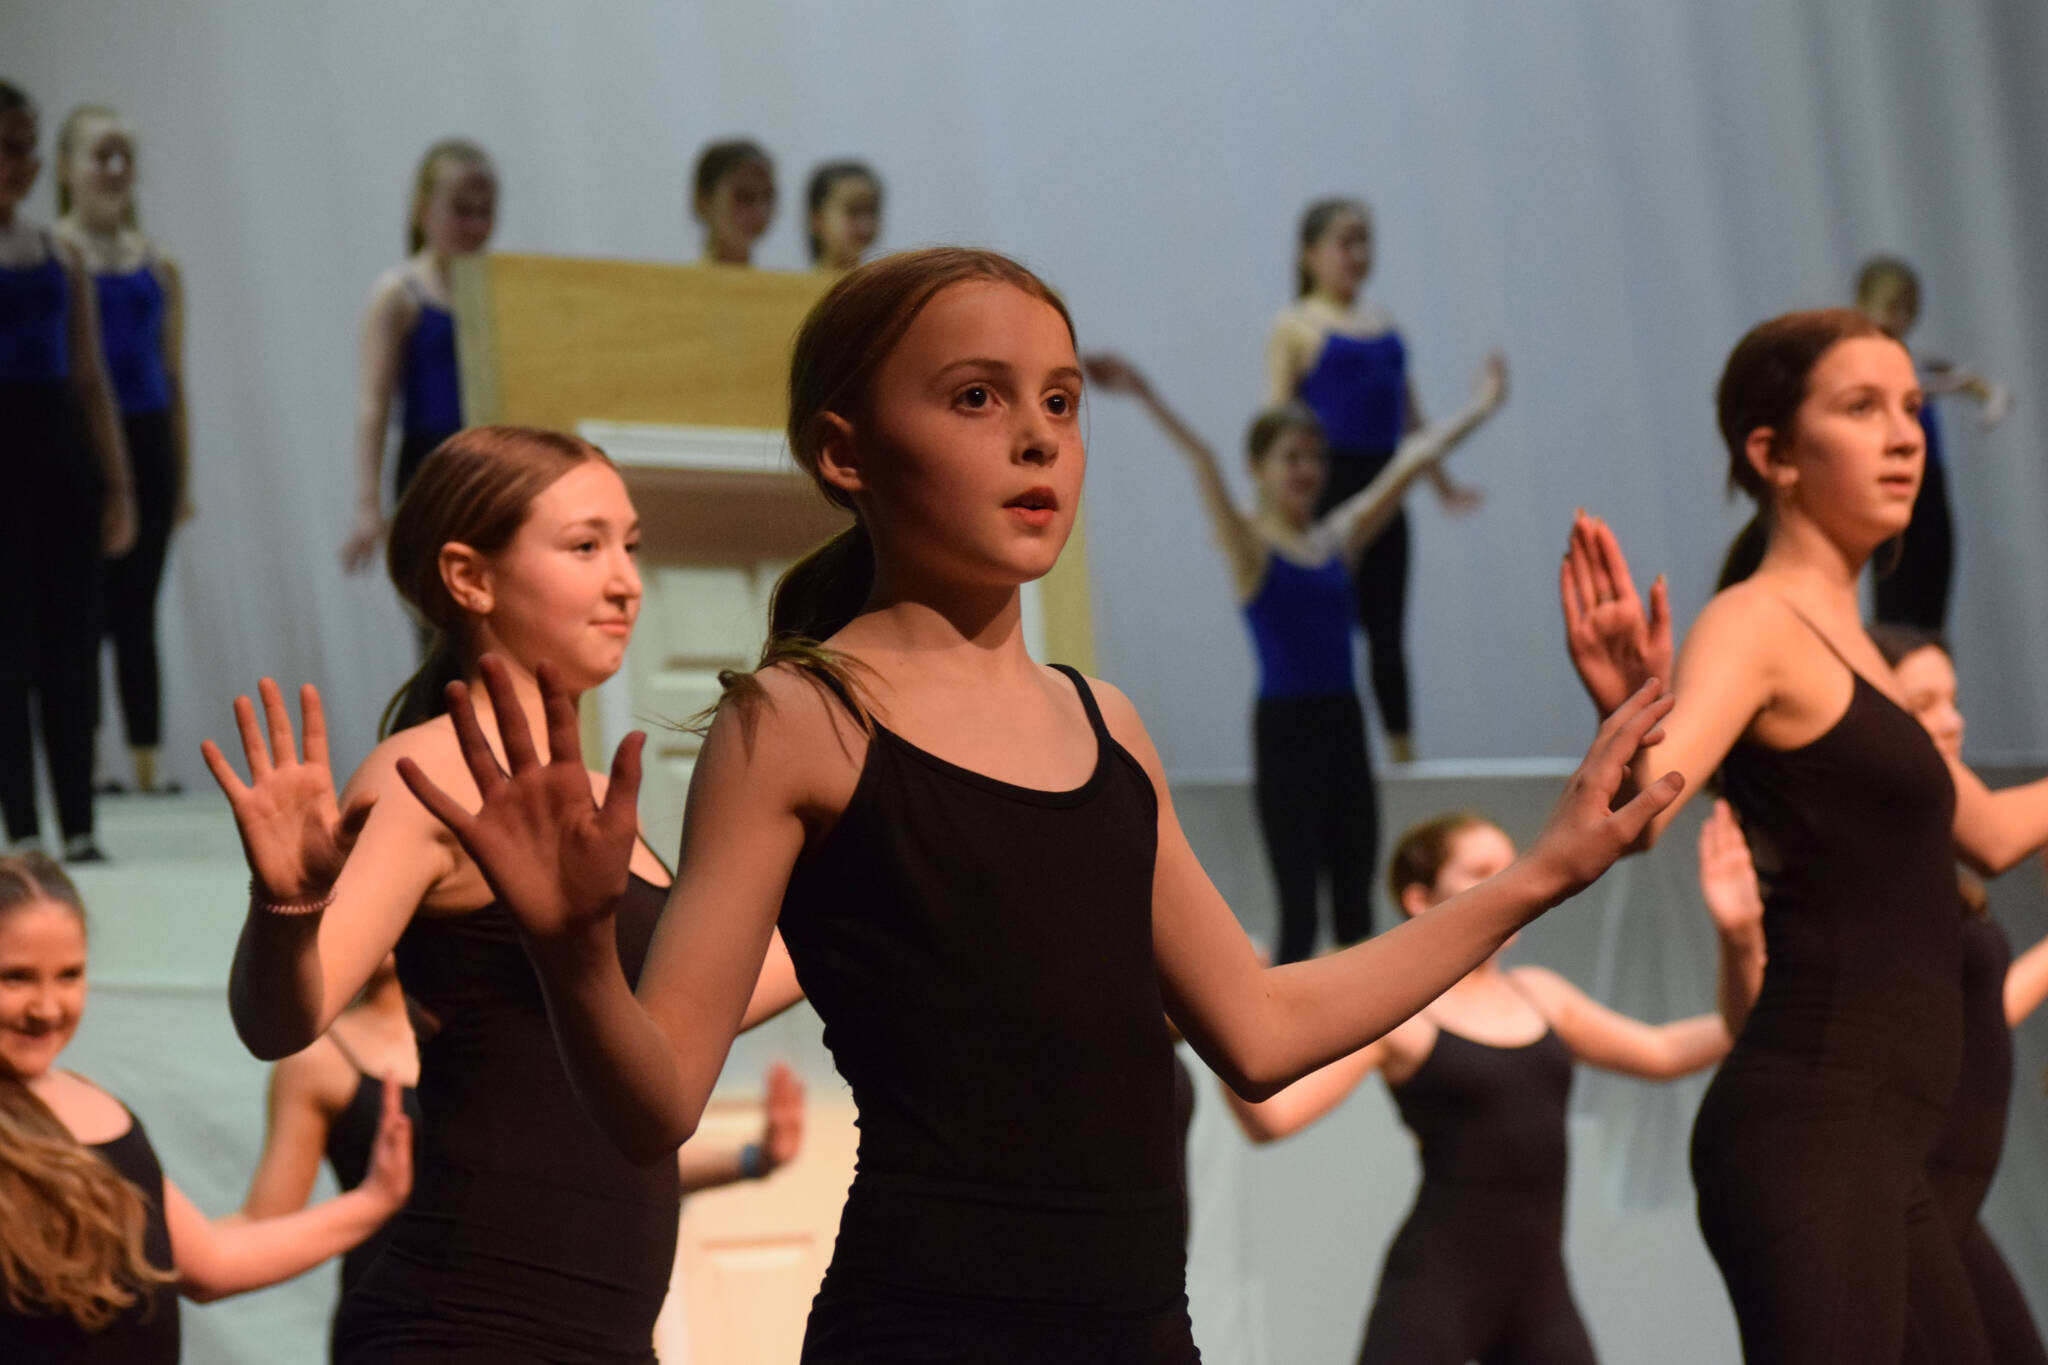 Performers prepare for the Forever Dance company showcase “Among Dreams” during a rehearsal on Tuesday, March 22, 2022, at the Renee C. Henderson Auditorium in Kenai, Alaska. (Camille Botello/Peninsula Clarion)